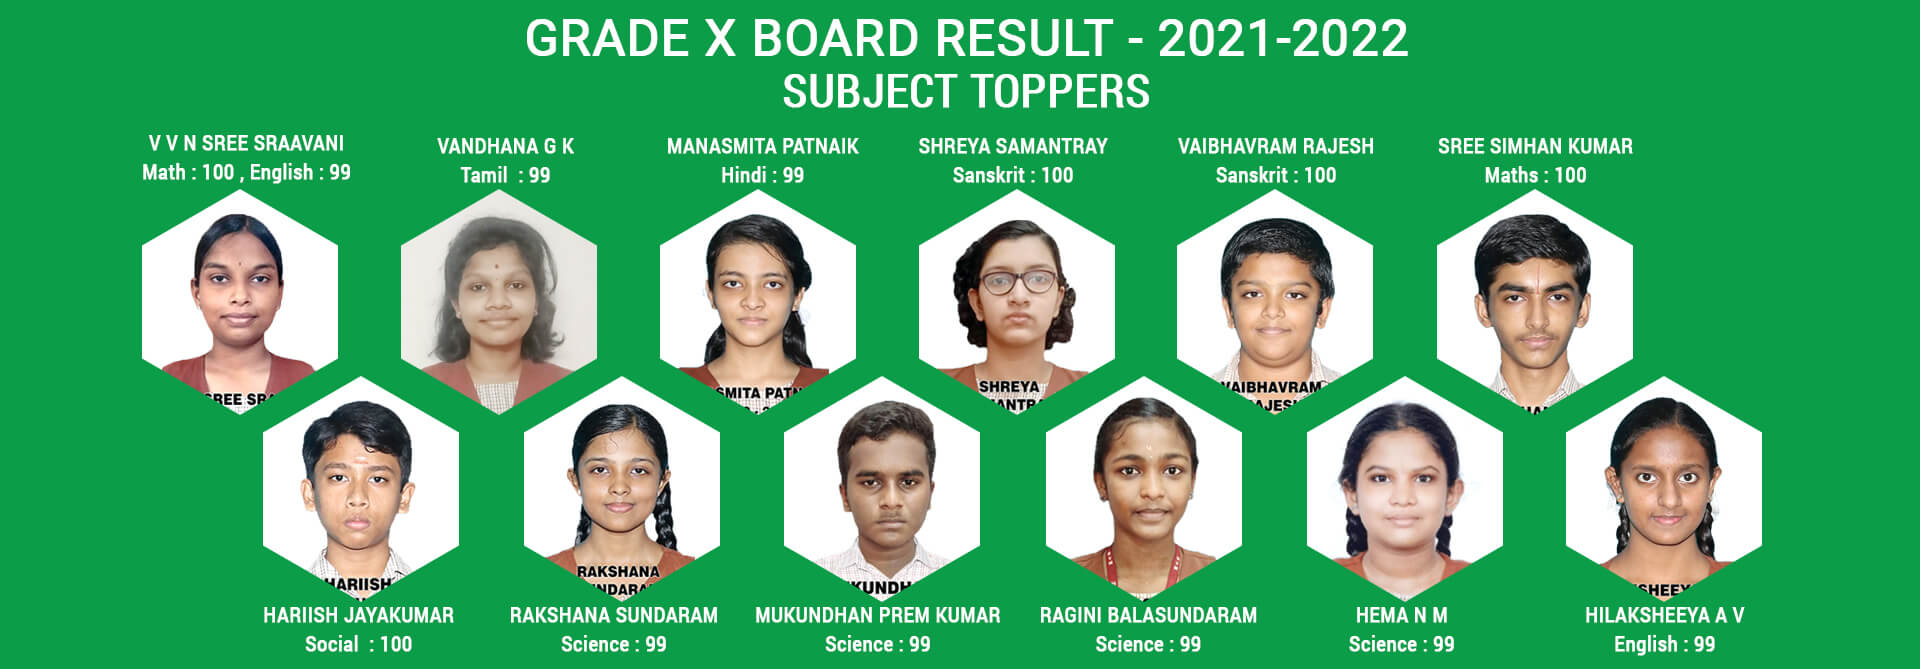 subj-toppers-10th